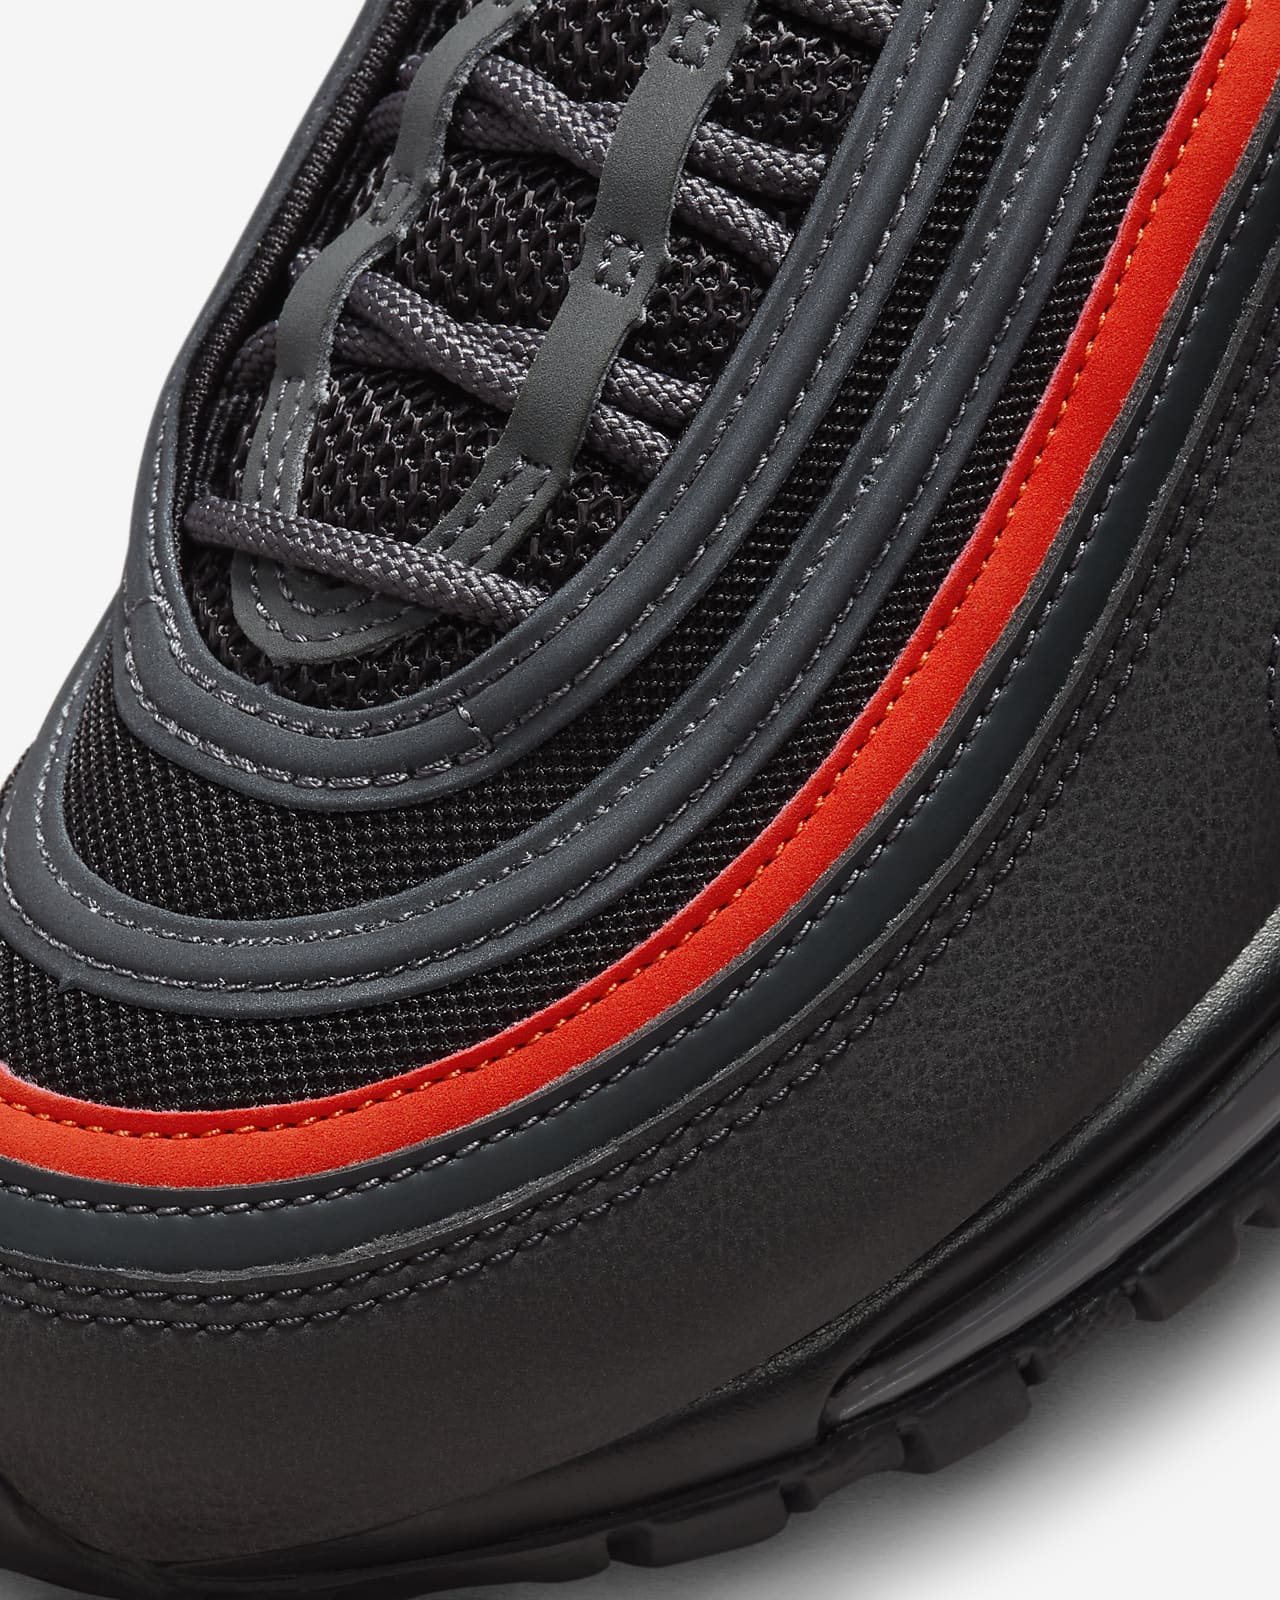 Men's Nike Air Max 97 - Black/Picante Red-Anthracite 8